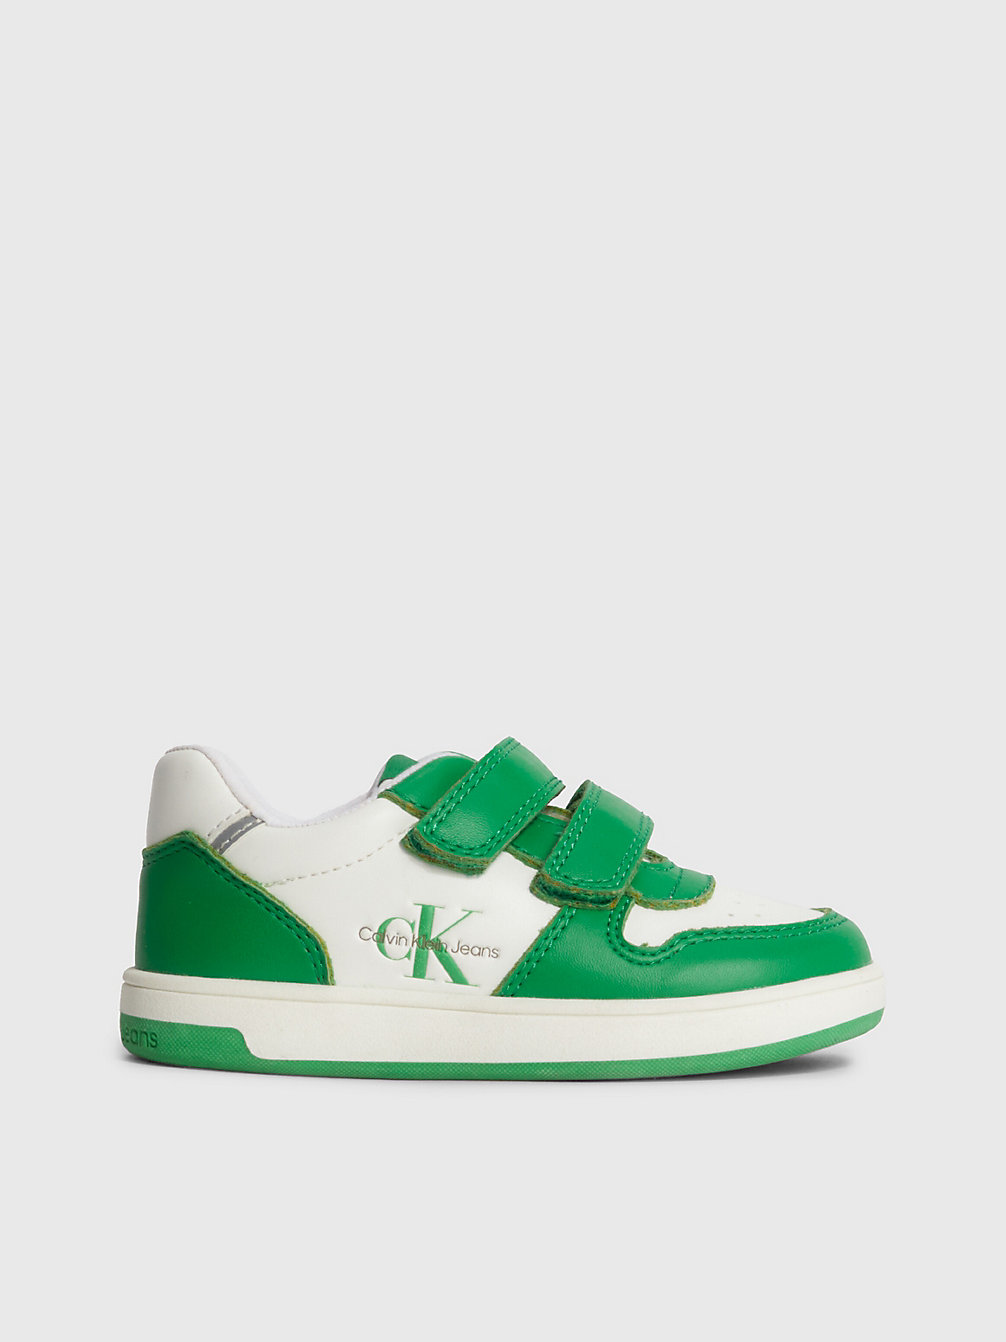 GREEN/WHITE Toddlers And Kids Velcro Trainers undefined kids unisex Calvin Klein